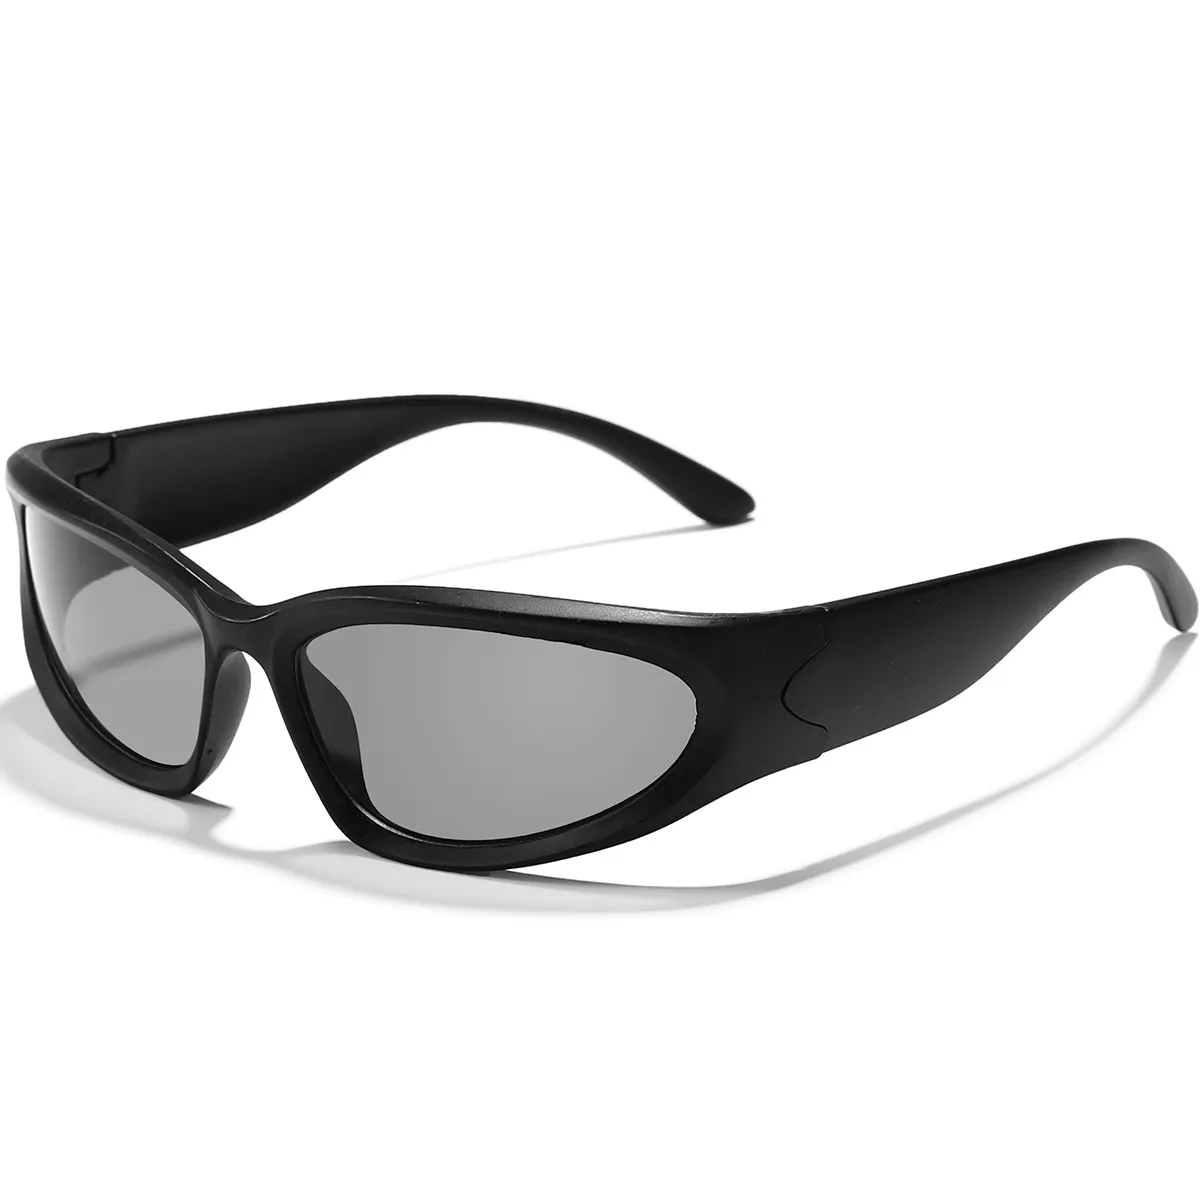 Toddler/kids Sporty Outdoor Cycling Sunglasses with Box Black big image 1